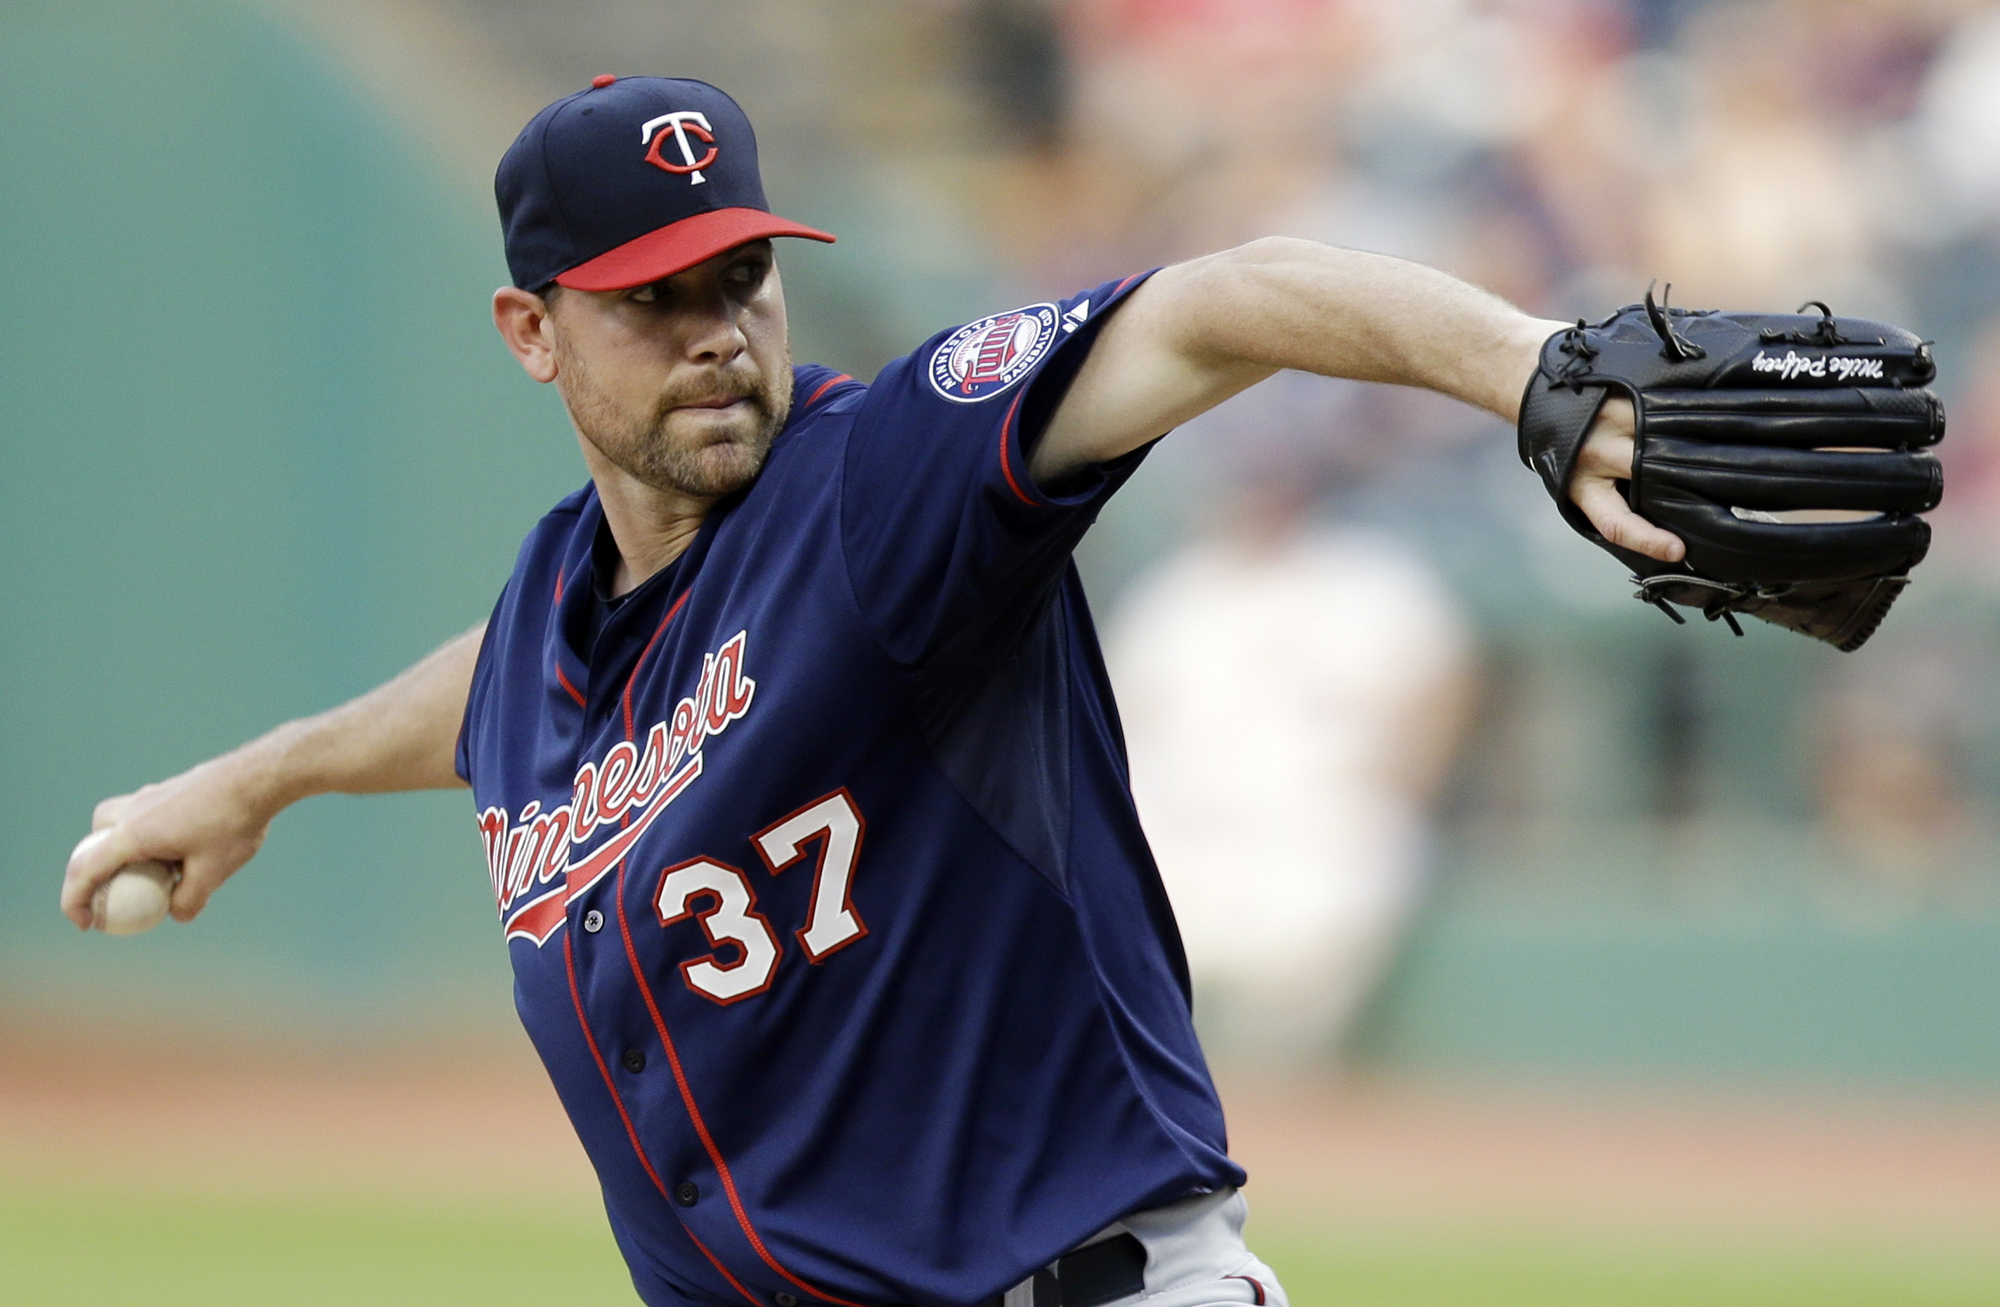 Twins righthander Mike Pelfrey says he was embarrassed by the way he pitched the first three innings Friday, nibbling at the corners, so he got more aggressive as game wore on.